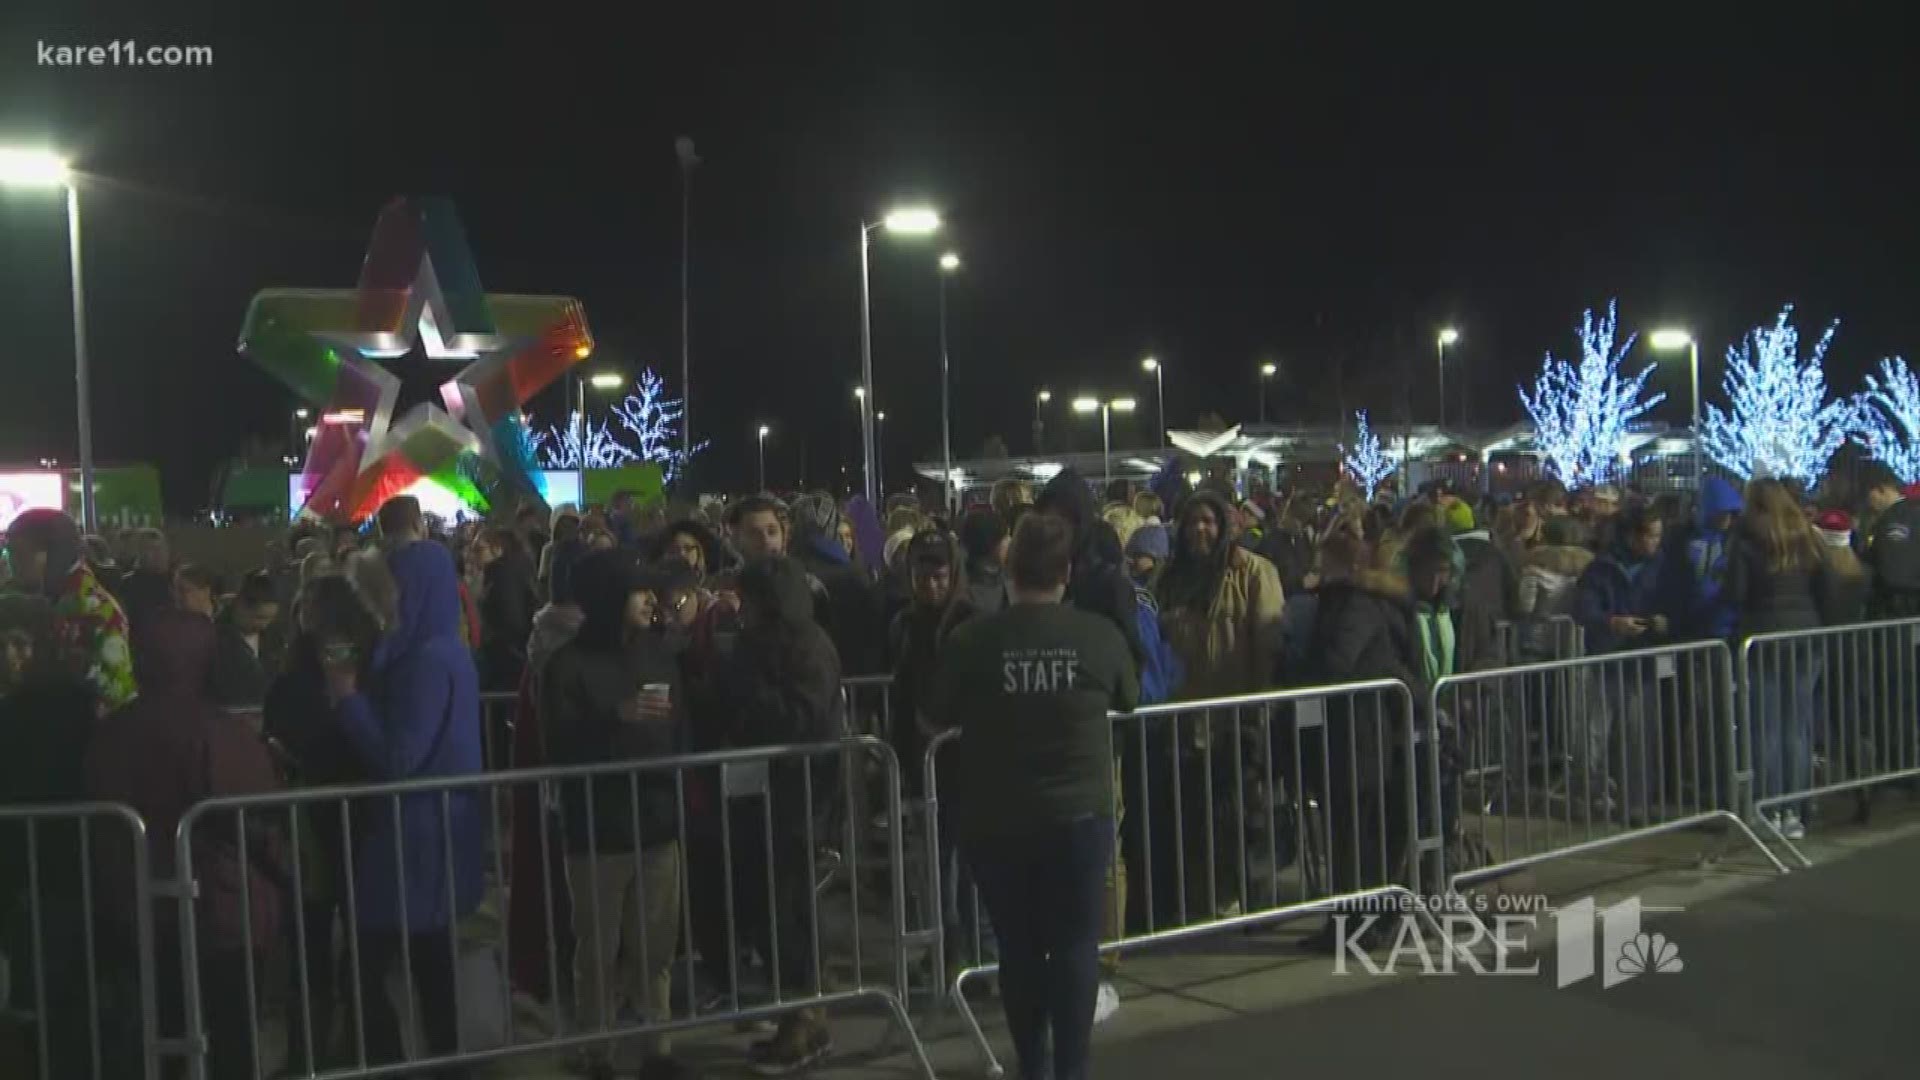 Last year 2,000 people lined up overnight, and this year Mall of America representatives believe it could be closer to 3,000. http://kare11.tv/2B6uKq7